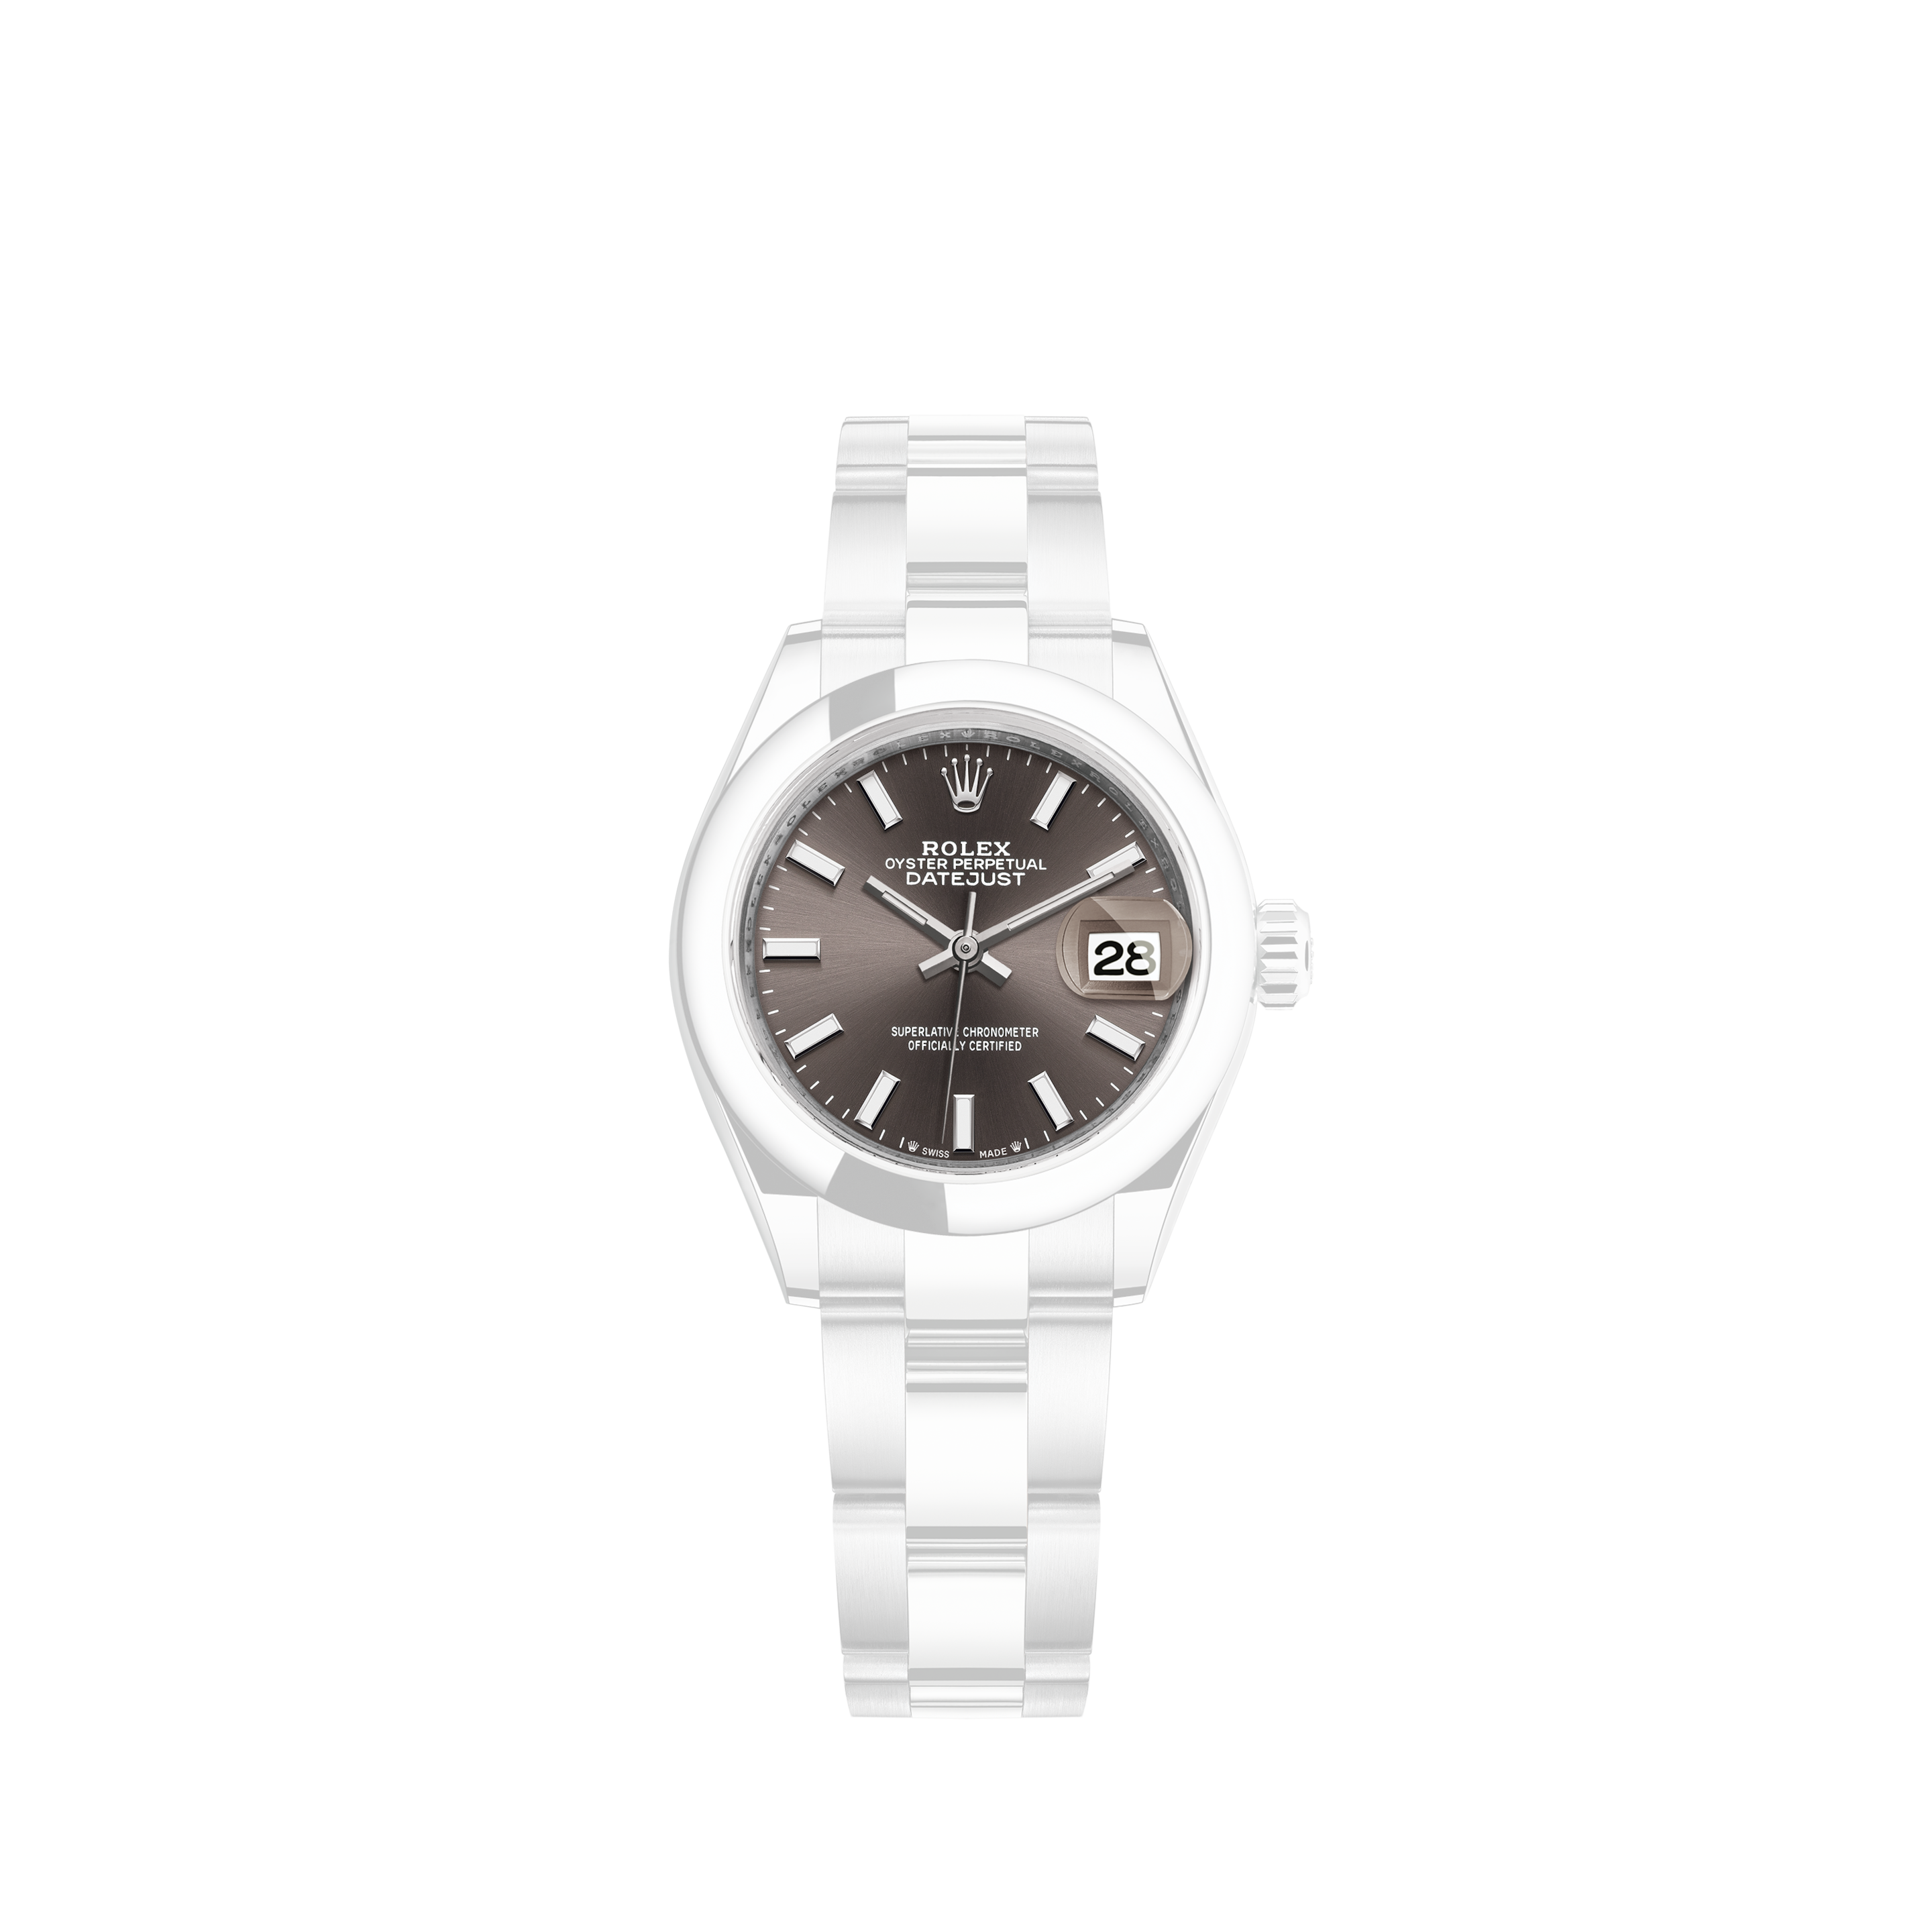 Rolex Datejust 31mm Medium 178274 Stahl Weissgold 750 Automatik Stainless Steel 18kt White Gold Oyster-band Chronometer